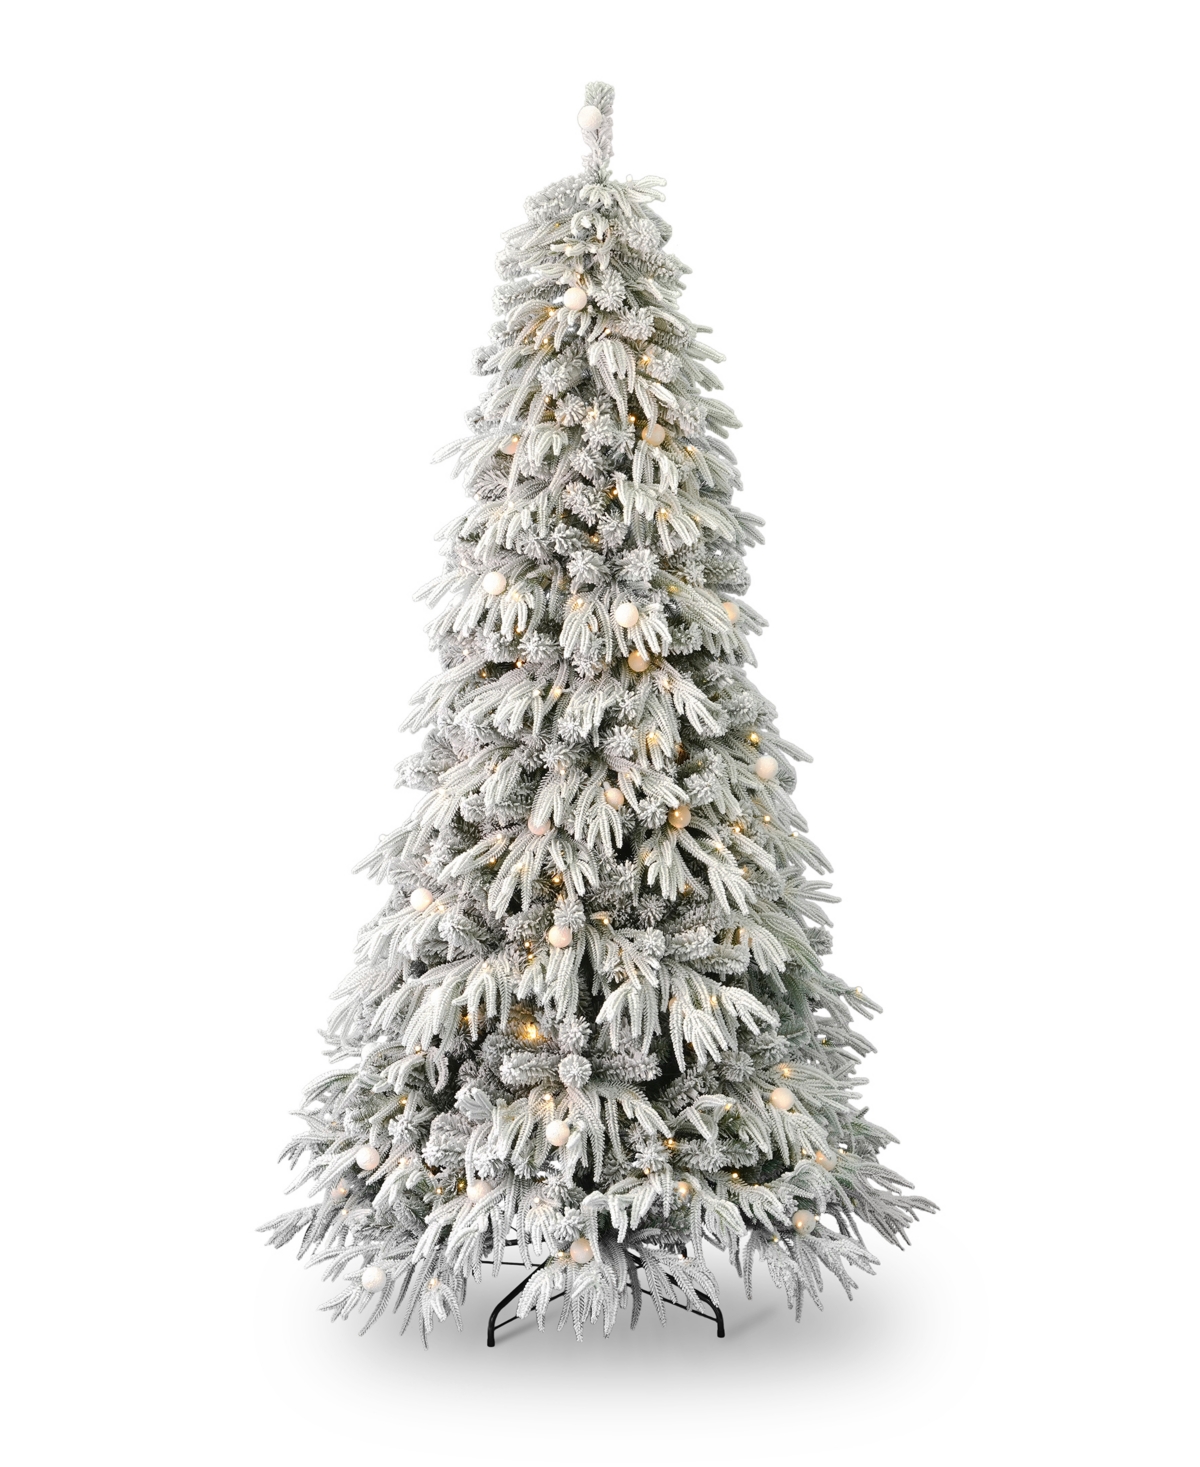 Frosted Acadia 7.5' Pre-Lit Full Flocked Pe Mixed Pvc Tree with Metal Stand, 3265 Tips, 400 Changing Led Lights - White